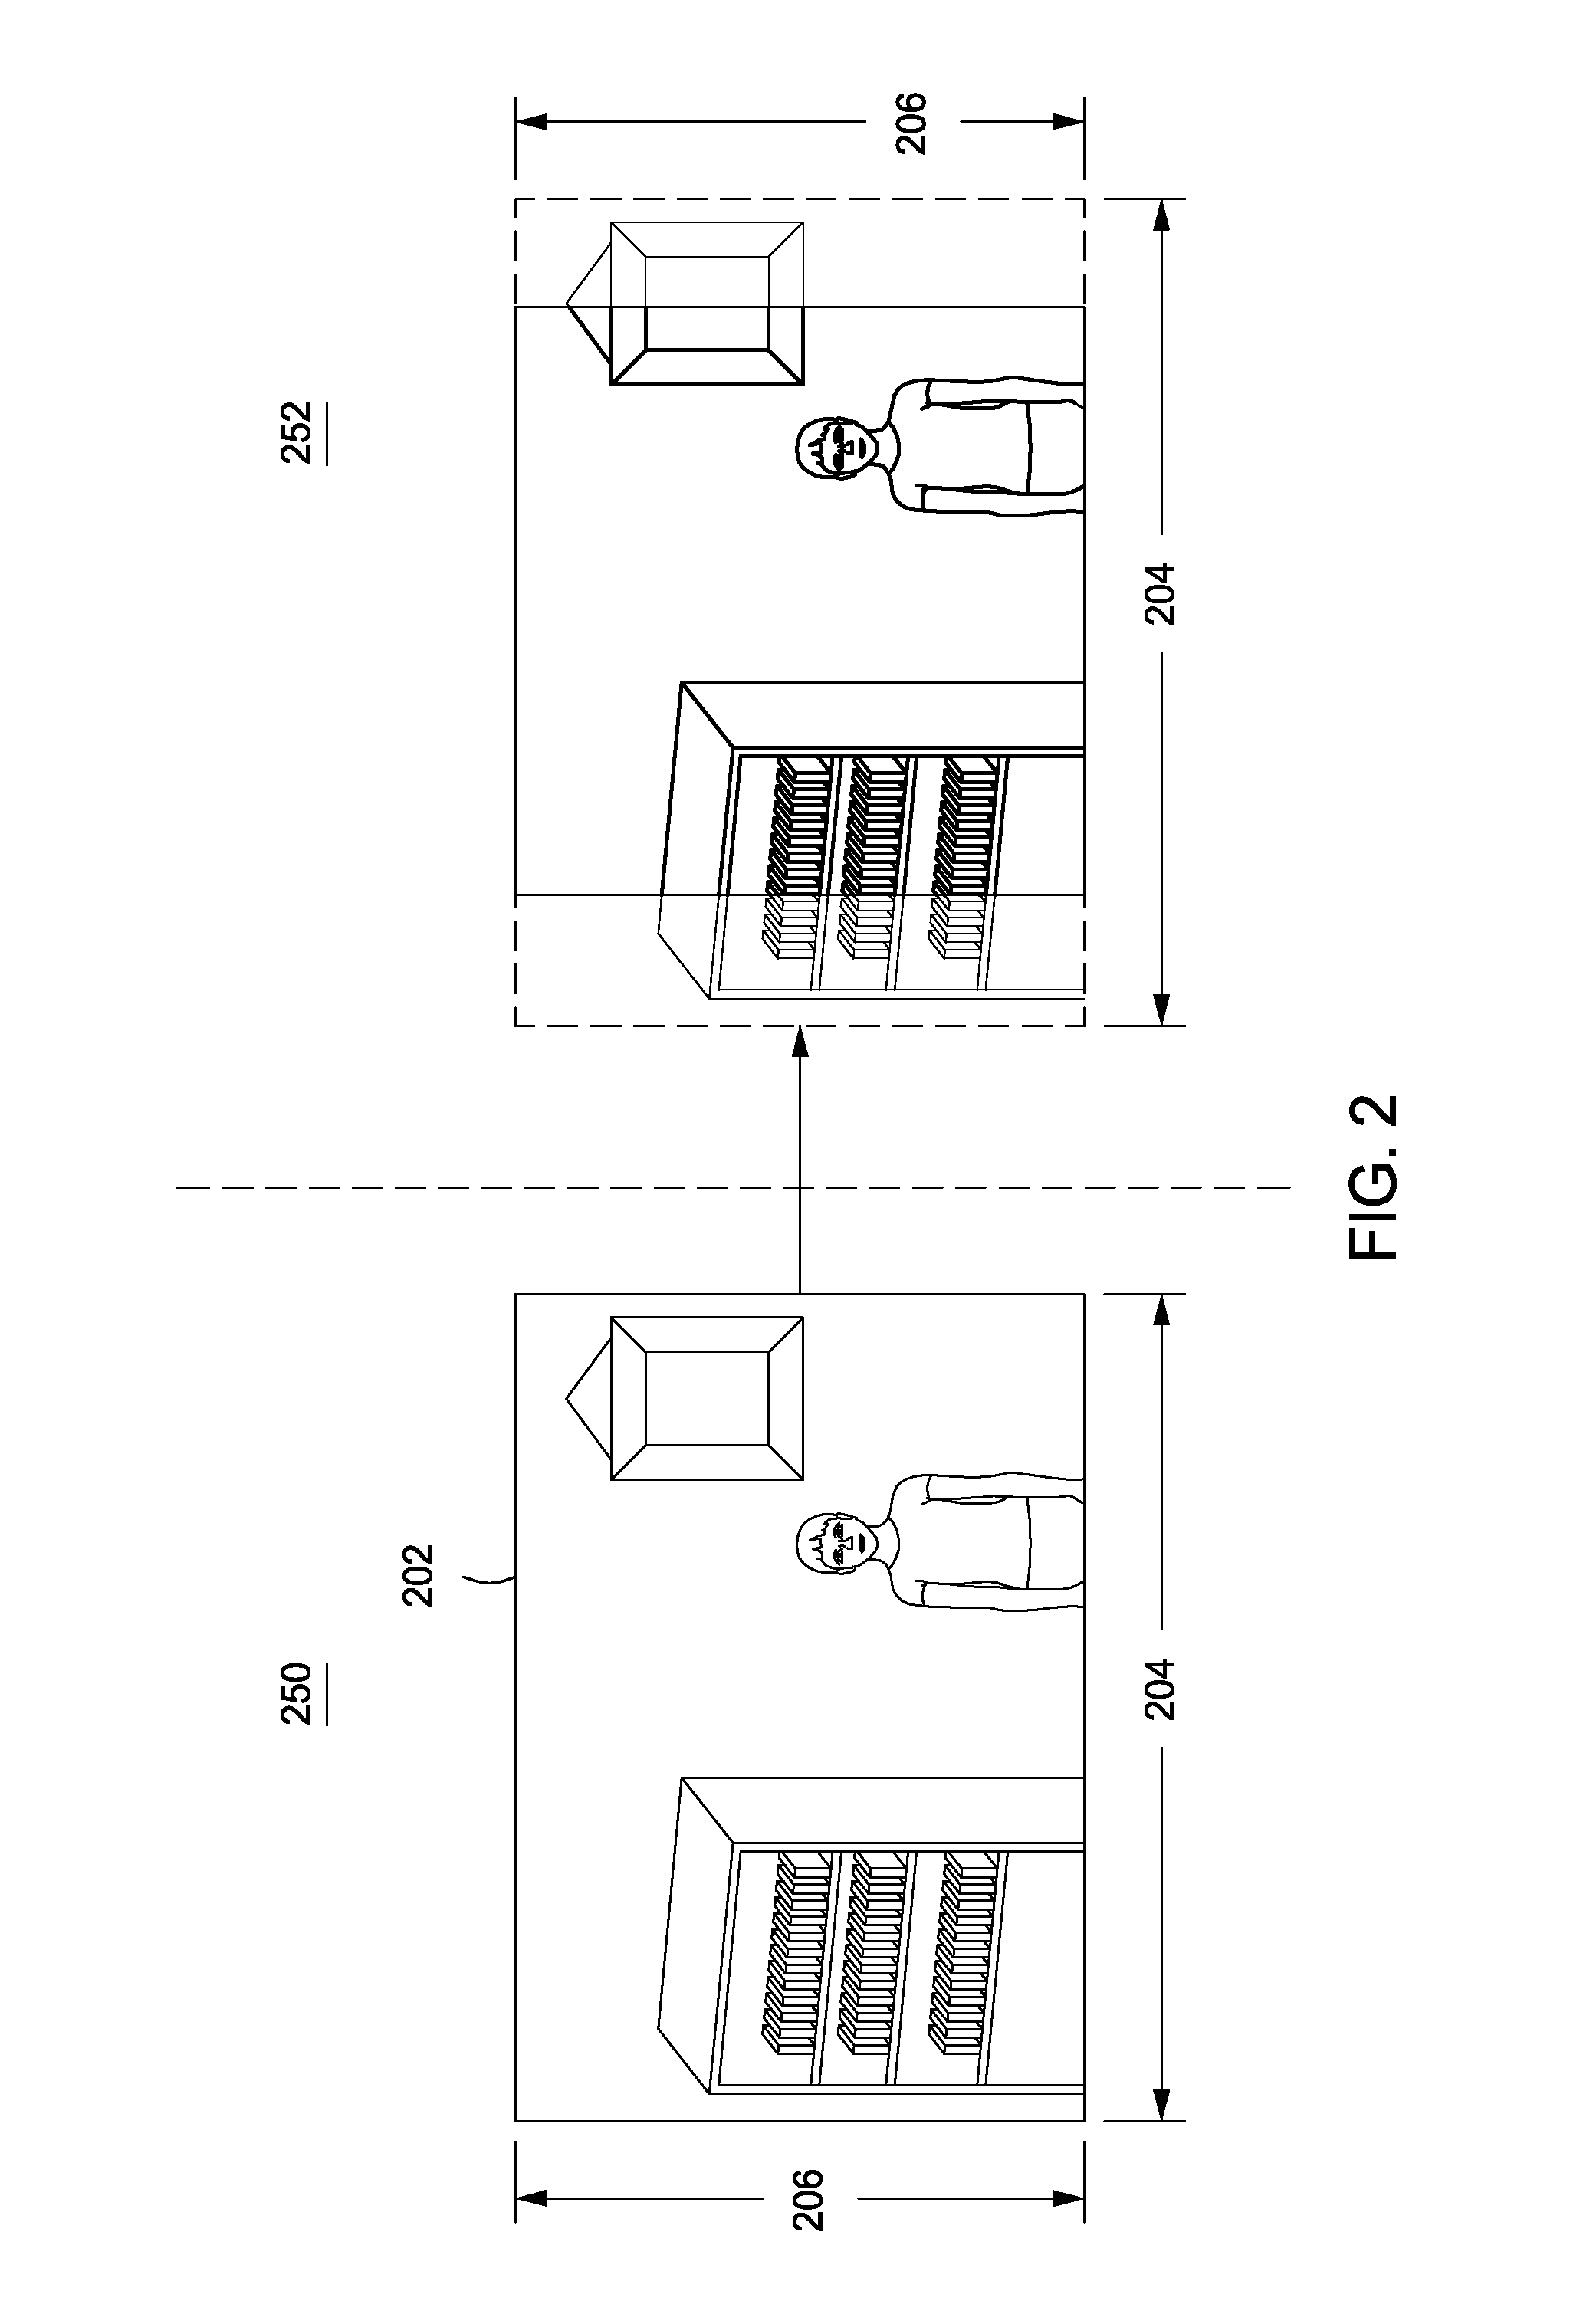 Method and apparatus for dynamically adjusting aspect ratio of images during a video call